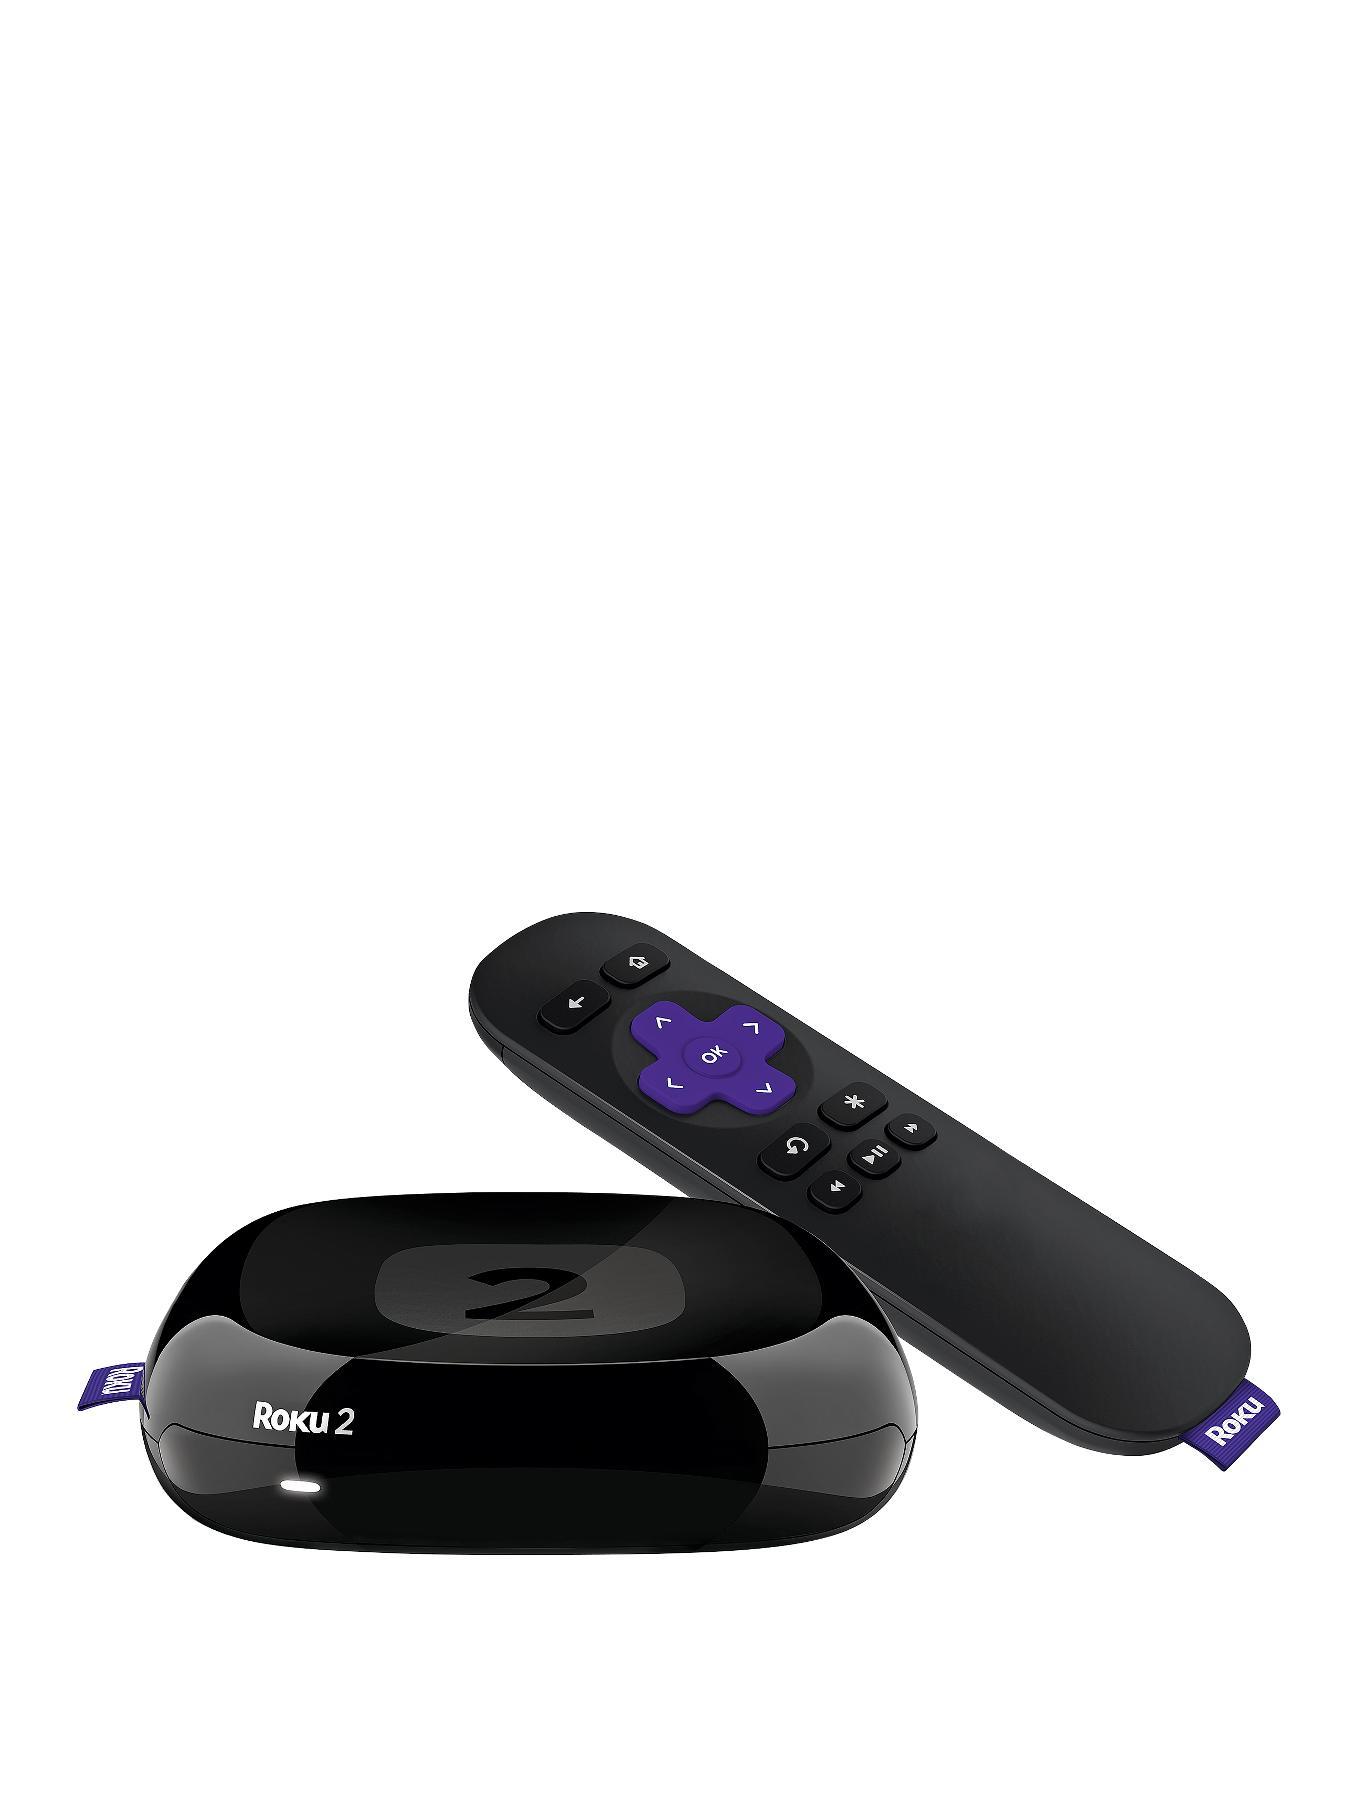 roku-2-streaming-player-including-3-months-now-tv-entertainment-pass.jpg?$266x354_standard$&$roundel_very$&p1_img=sale_roundel